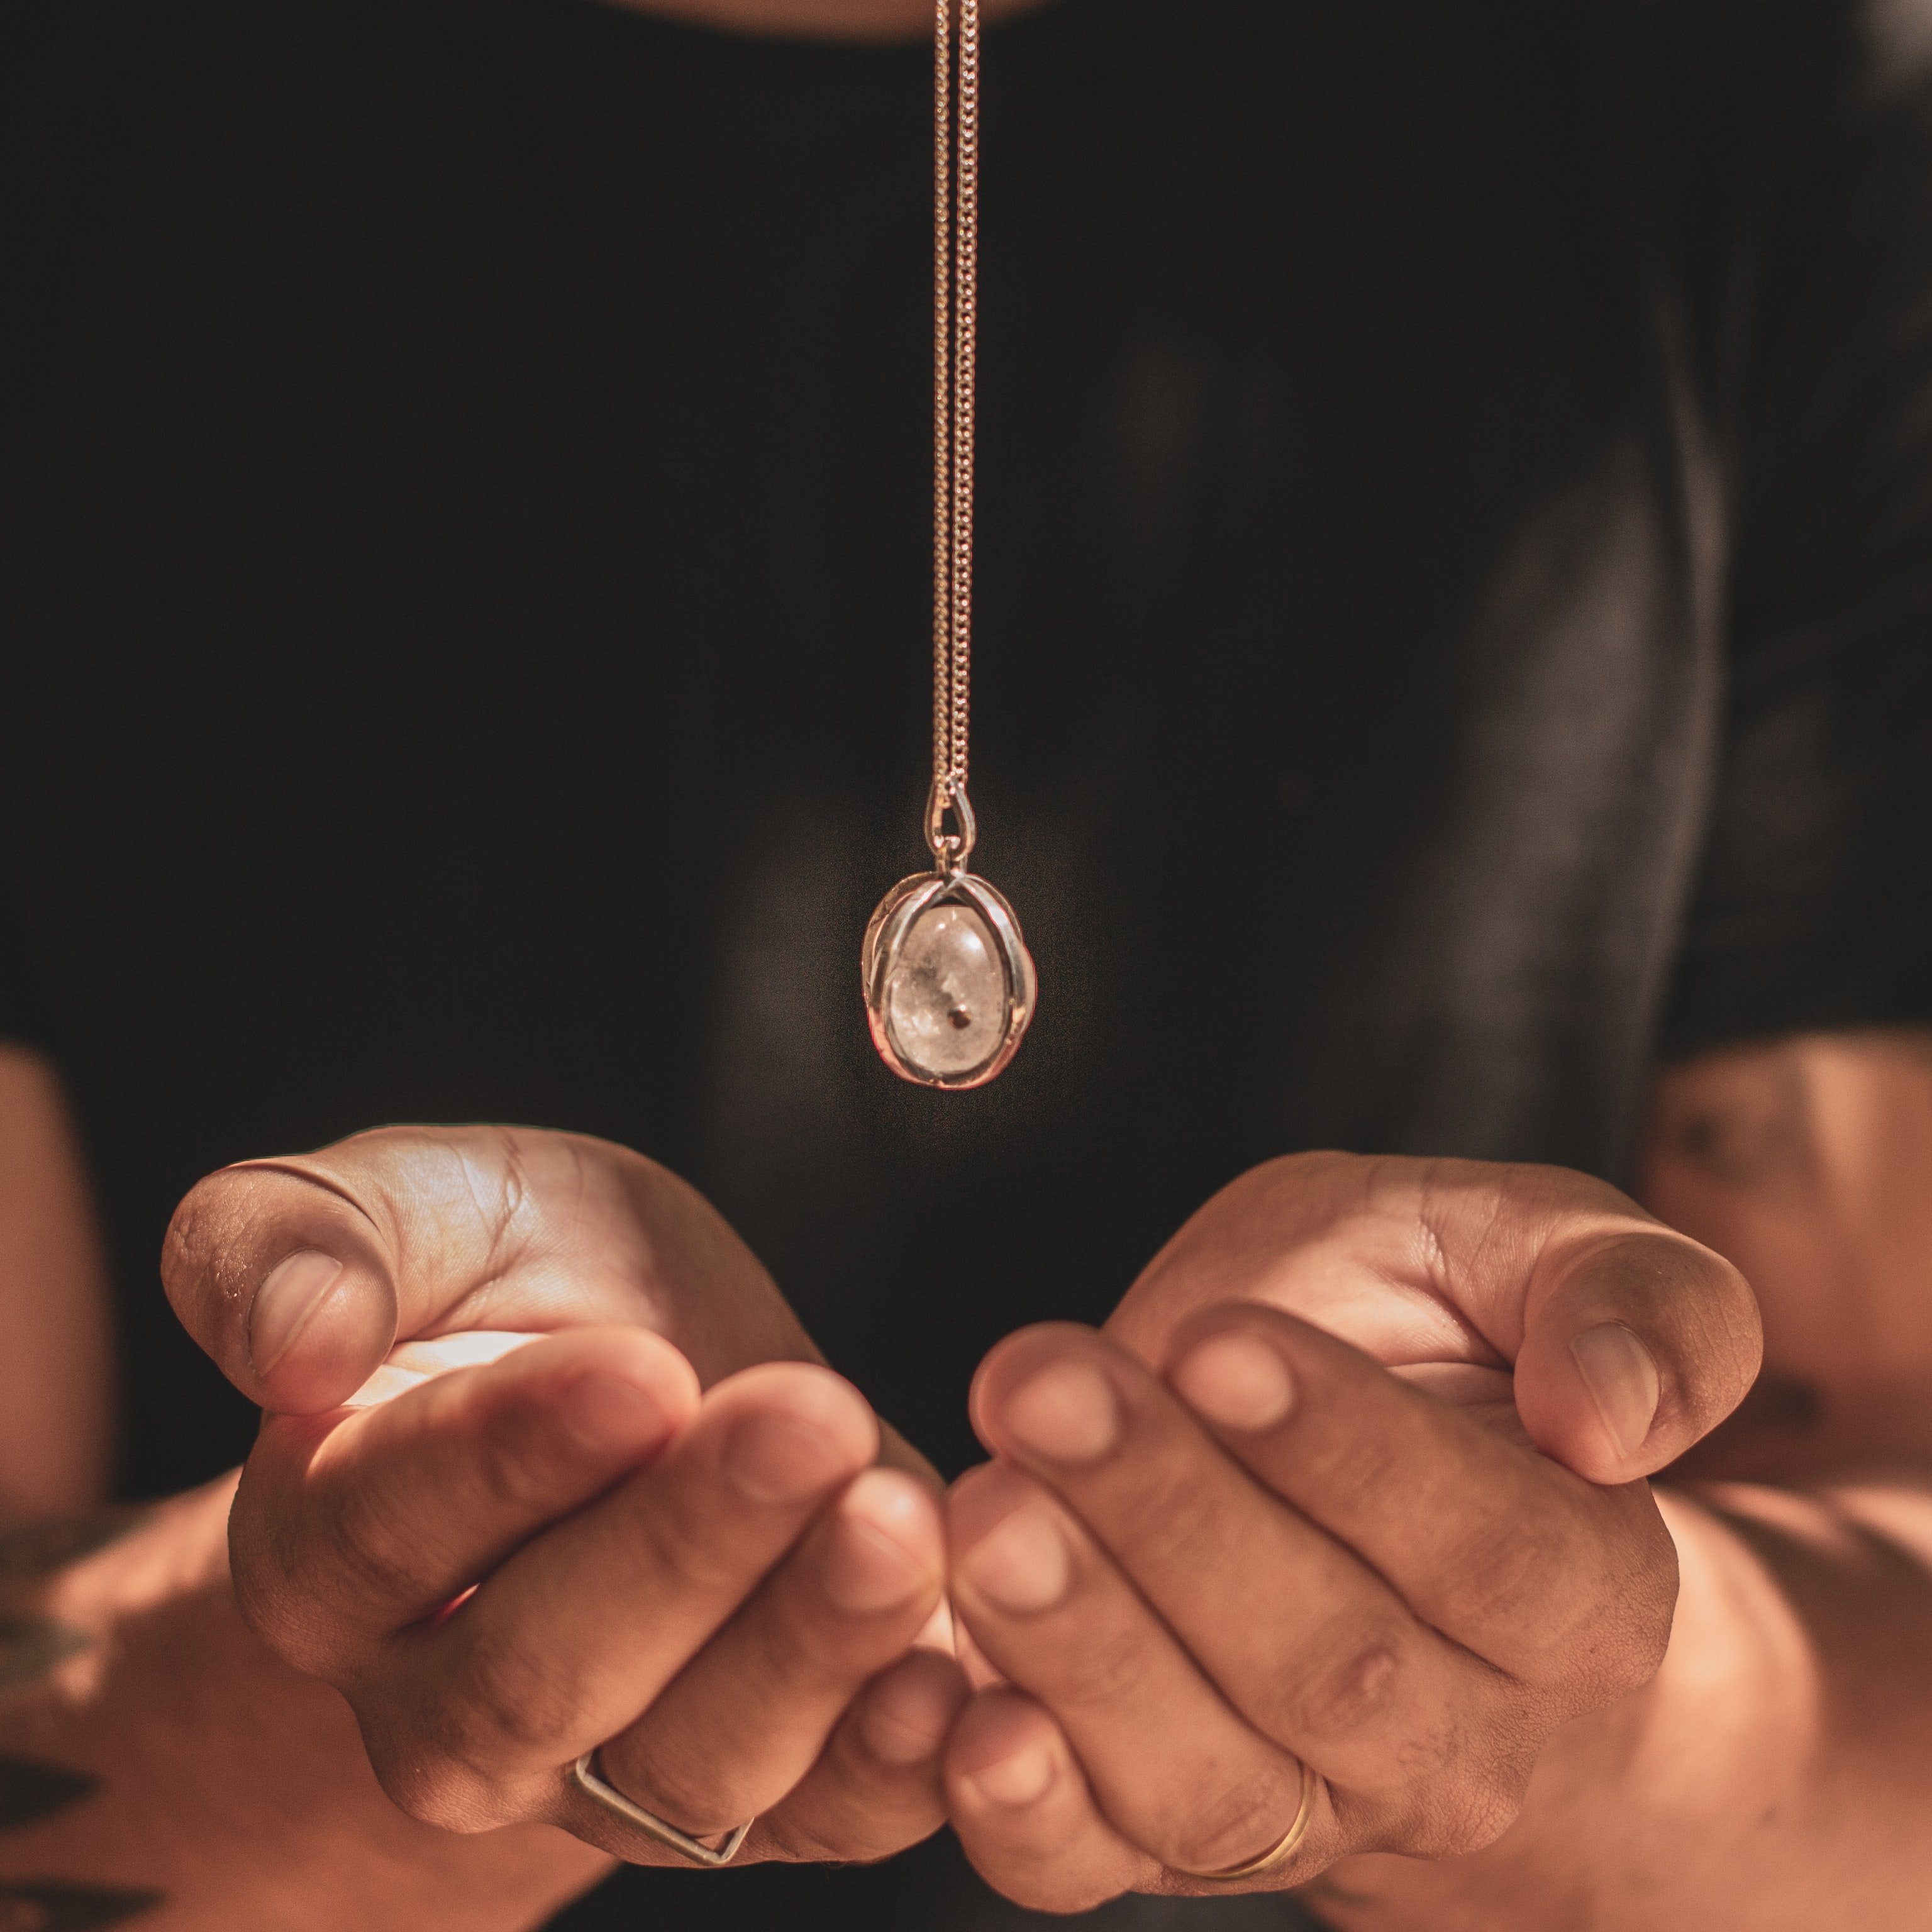 The boy had a pendant that had belonged to Jared's son. | Source: Unsplash